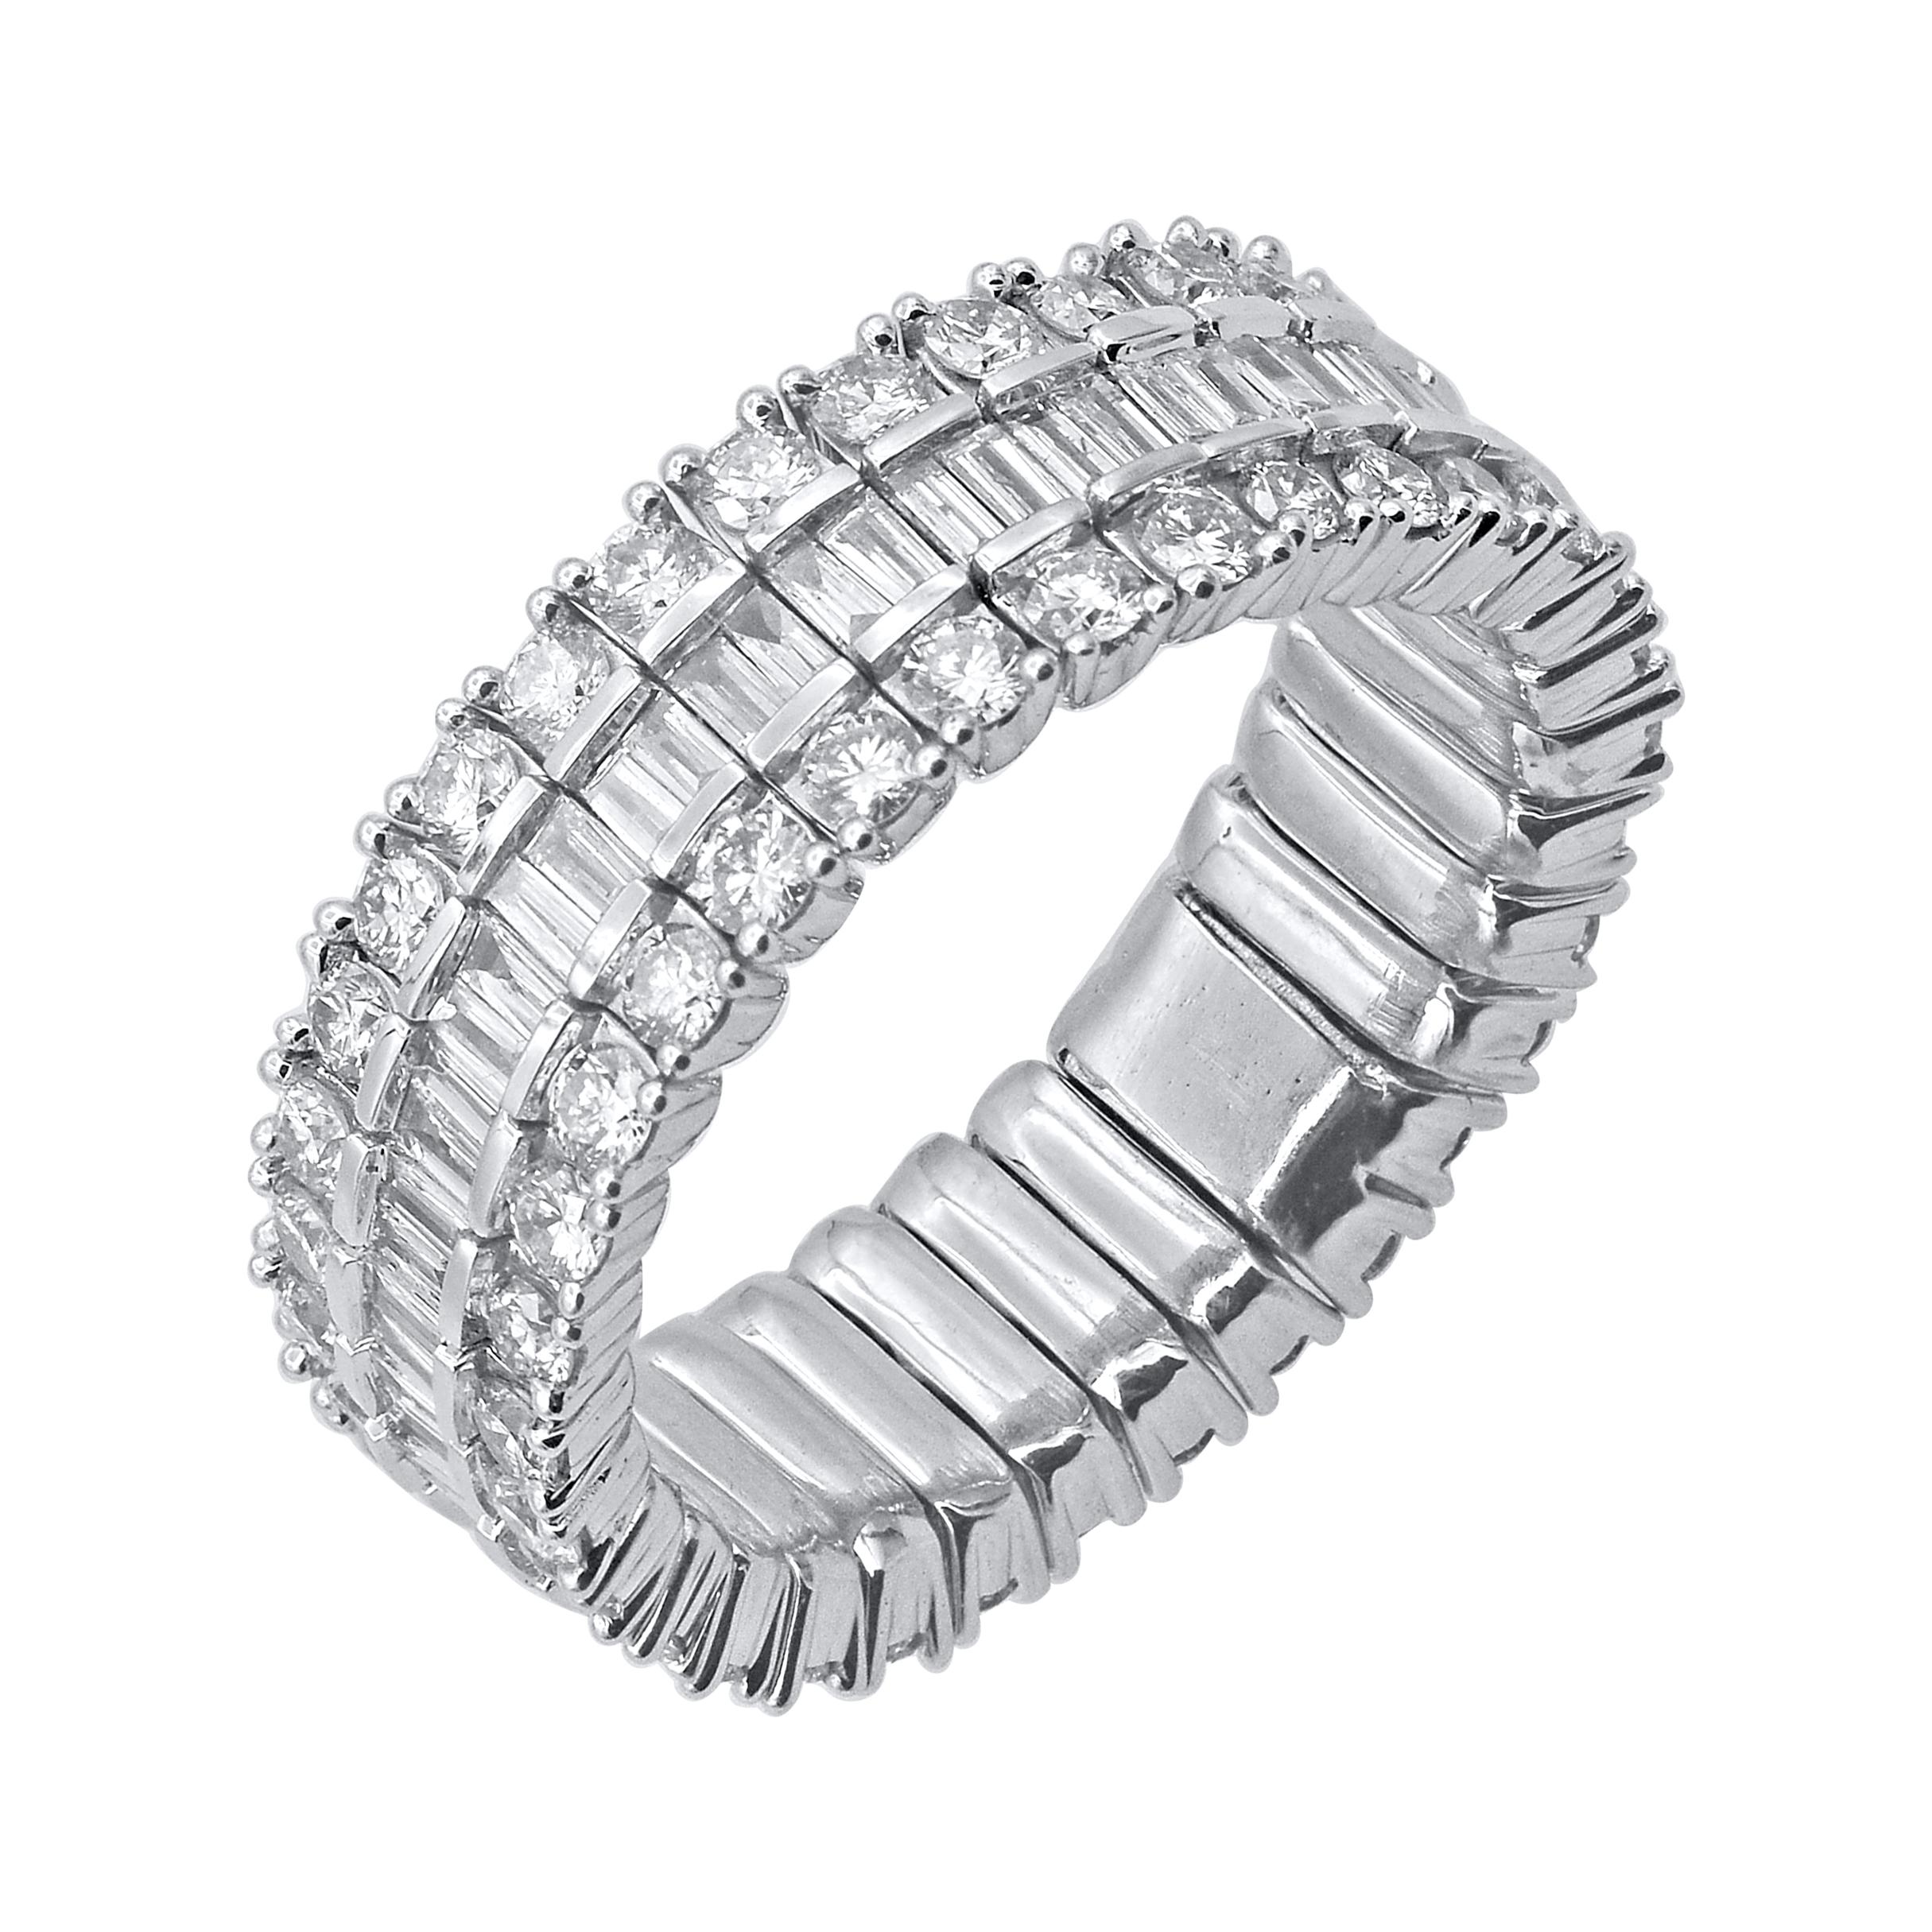 Contemporary TJD 2.0 Carat Round & Baguette Diamond Eternity Band Ring in 14 Karat White Gold For Sale